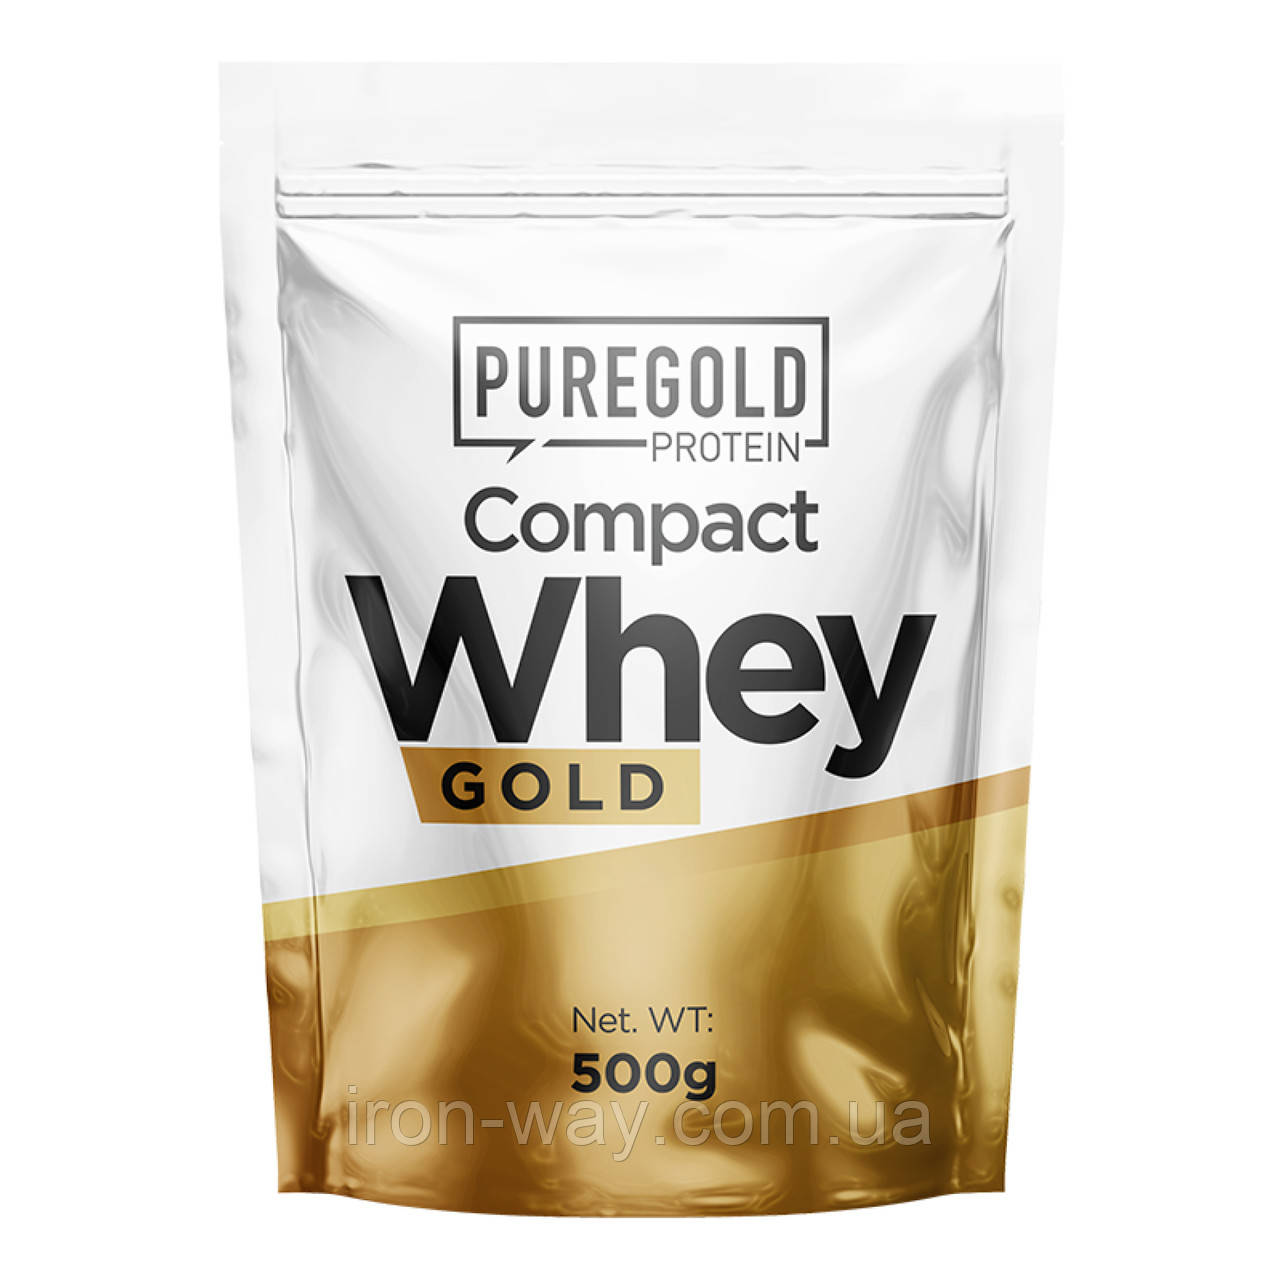 Compact Whey Gold - 500g Cookies and Cream